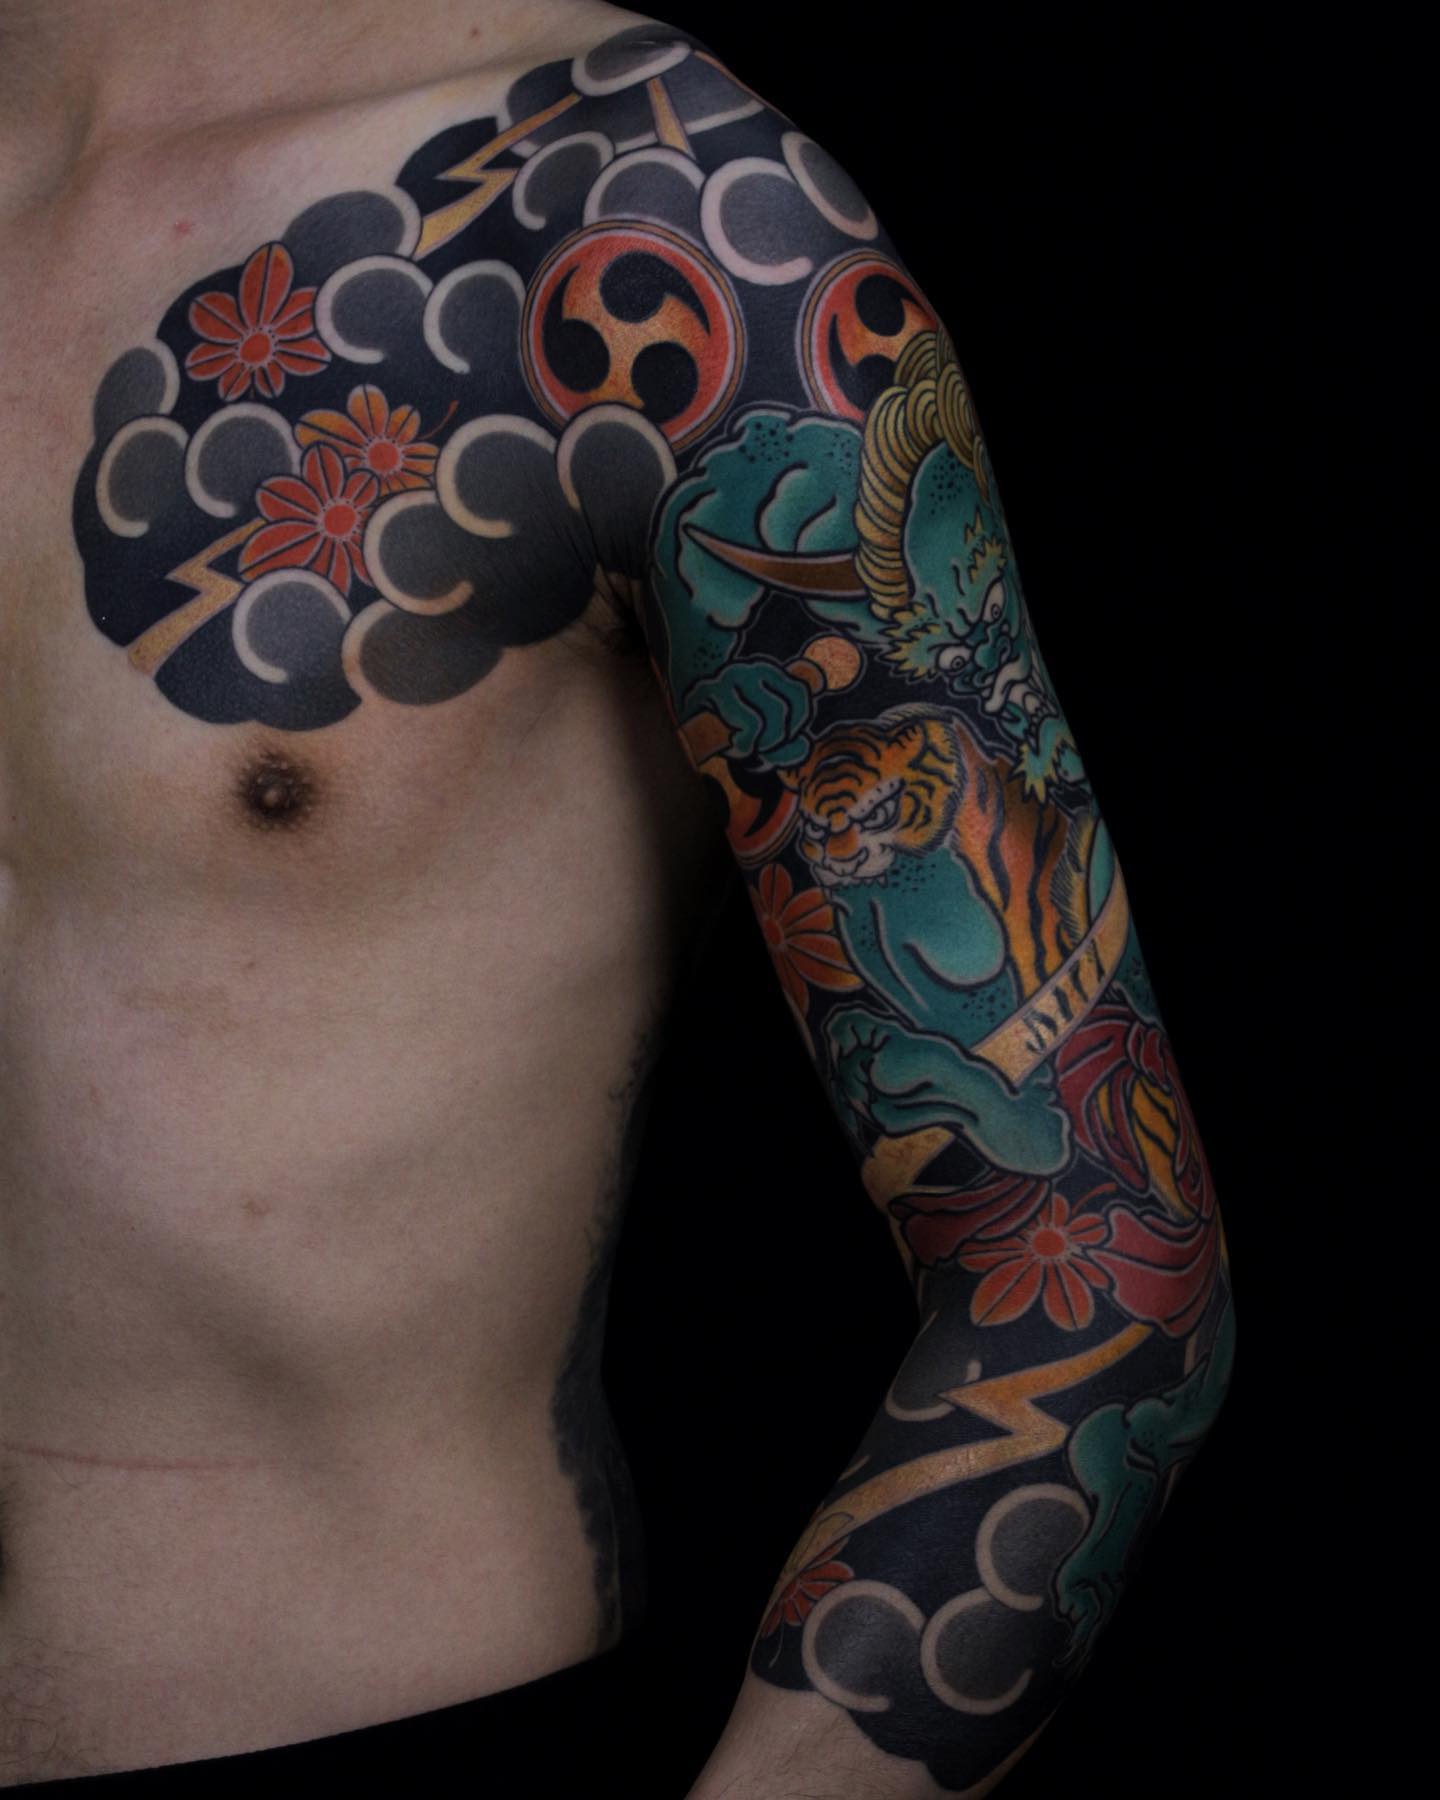 20 Epic Chinese Tattoo Designs Inspiring Men and Women - Hairstyle